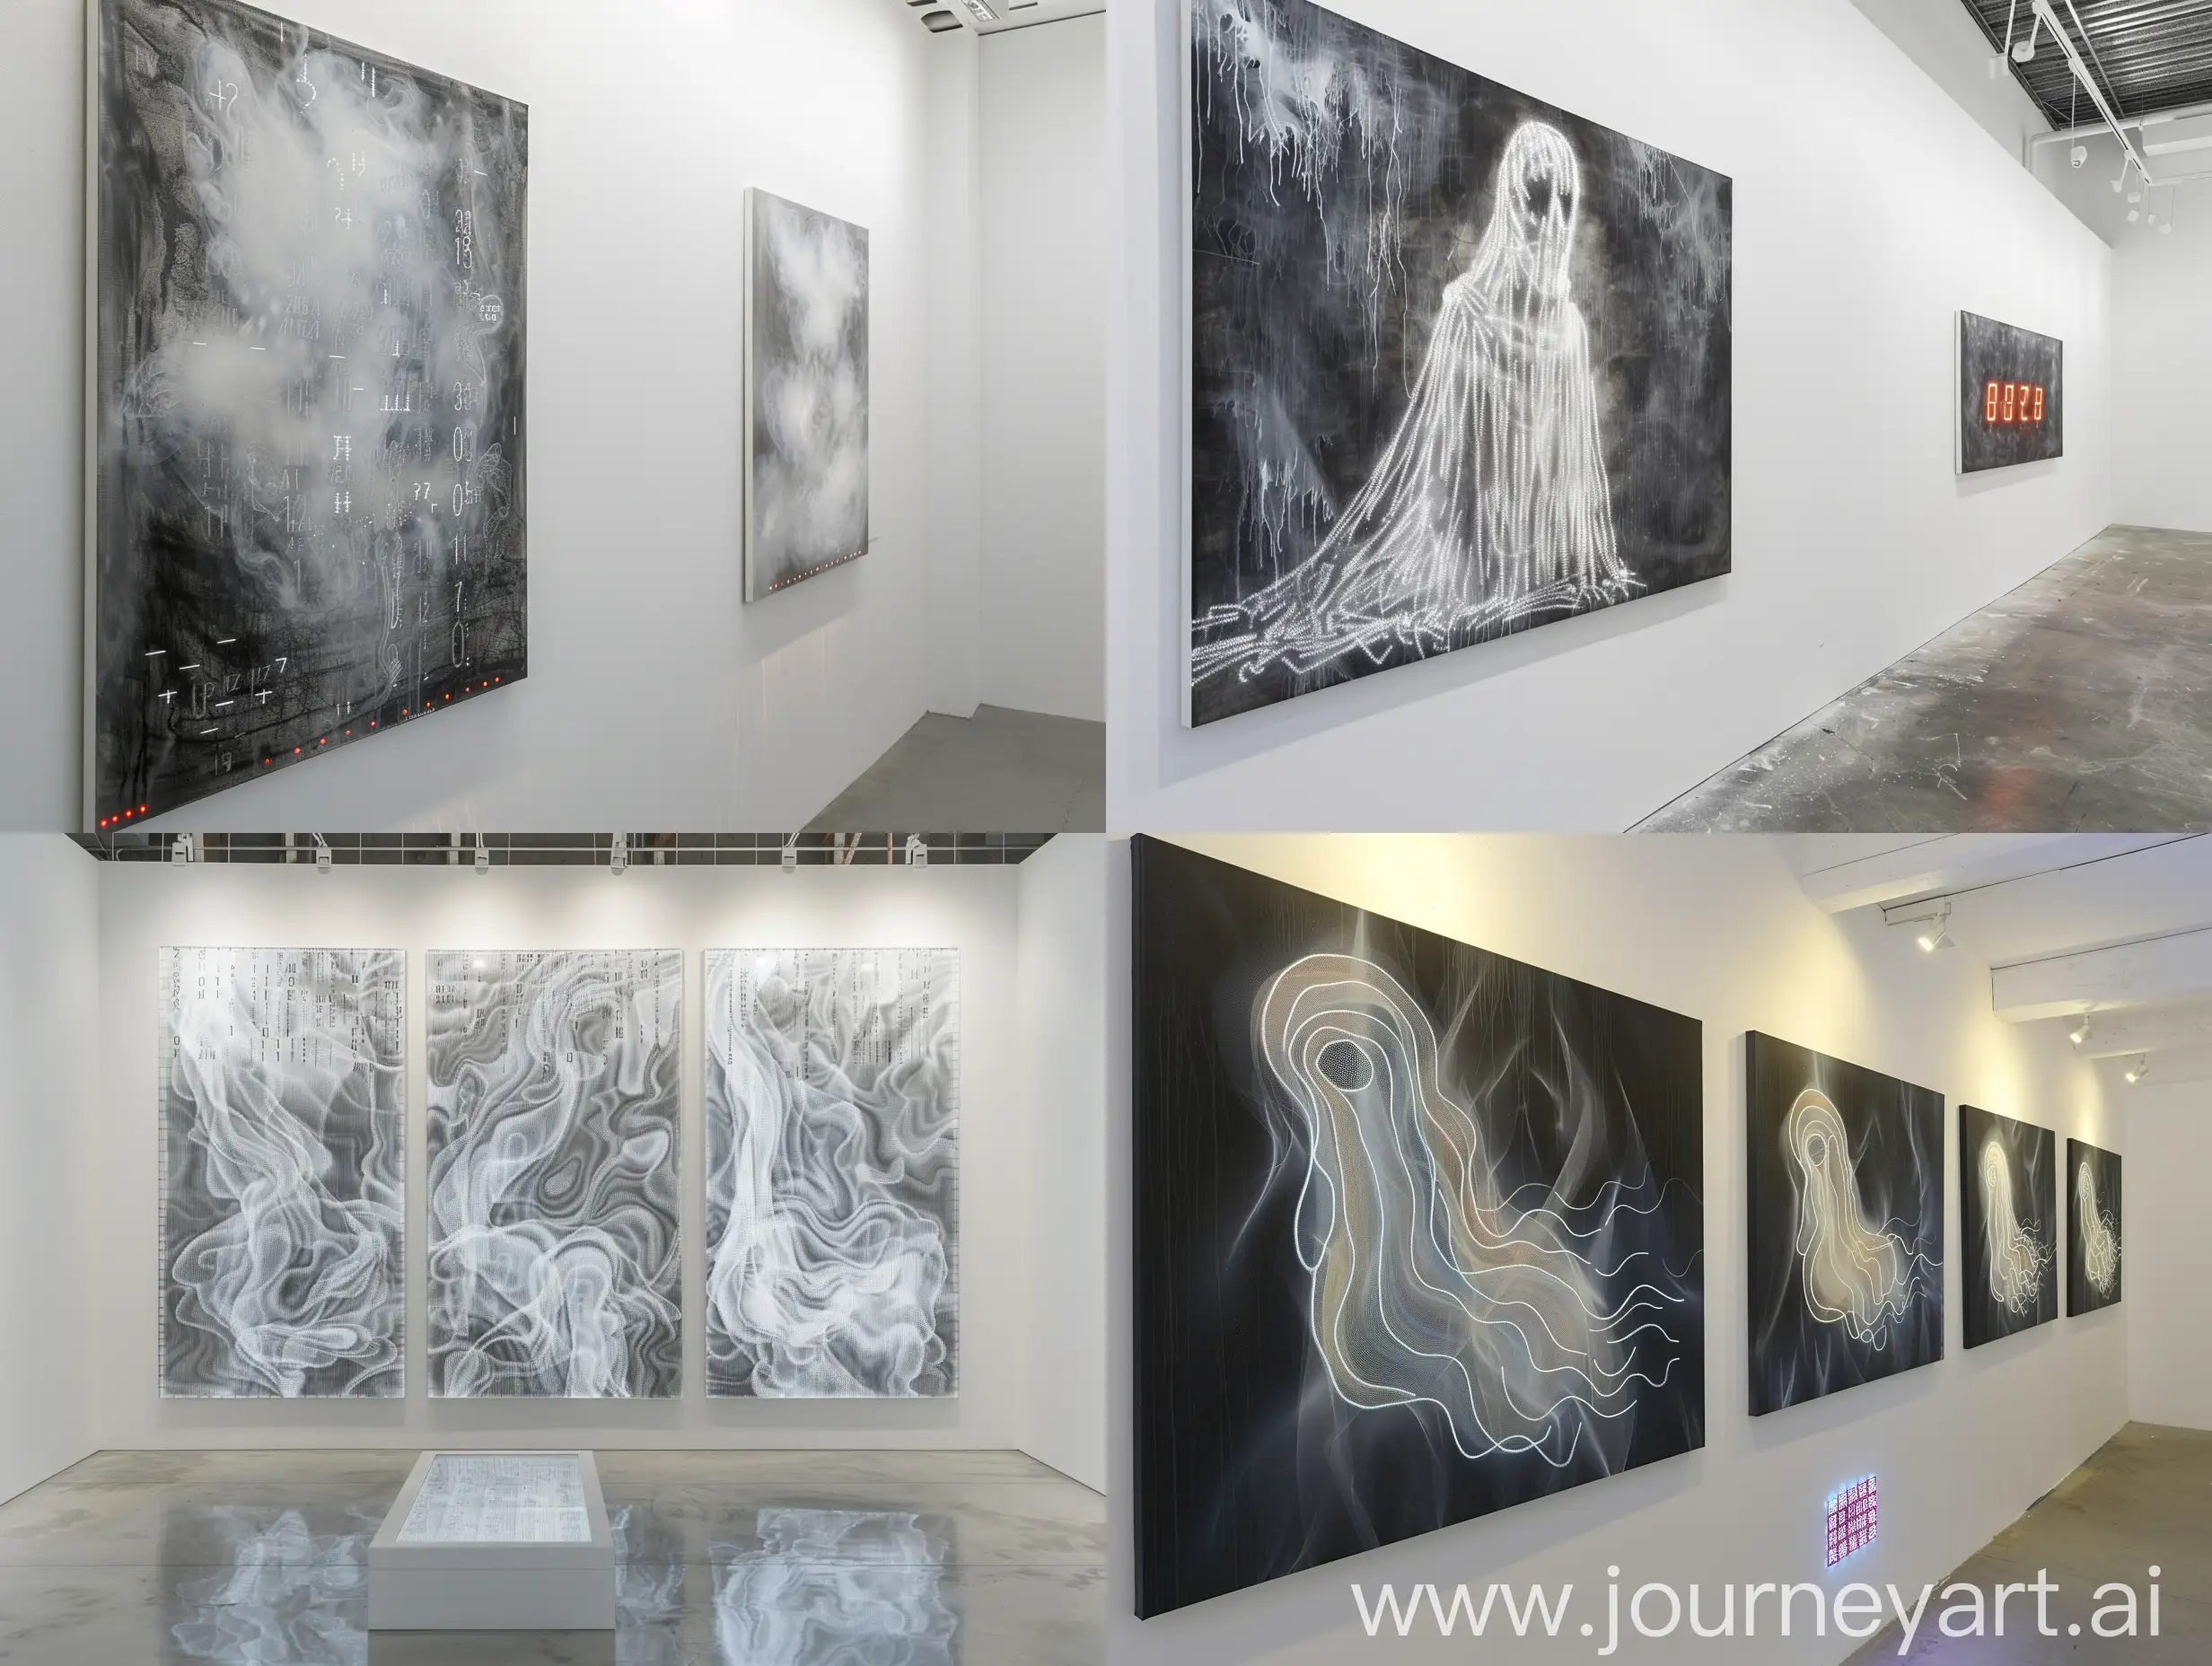 generative line art paintings based on ghostly energy and hauntings with a number display generating random numbers in a contemporary art gallery white walls design architect product